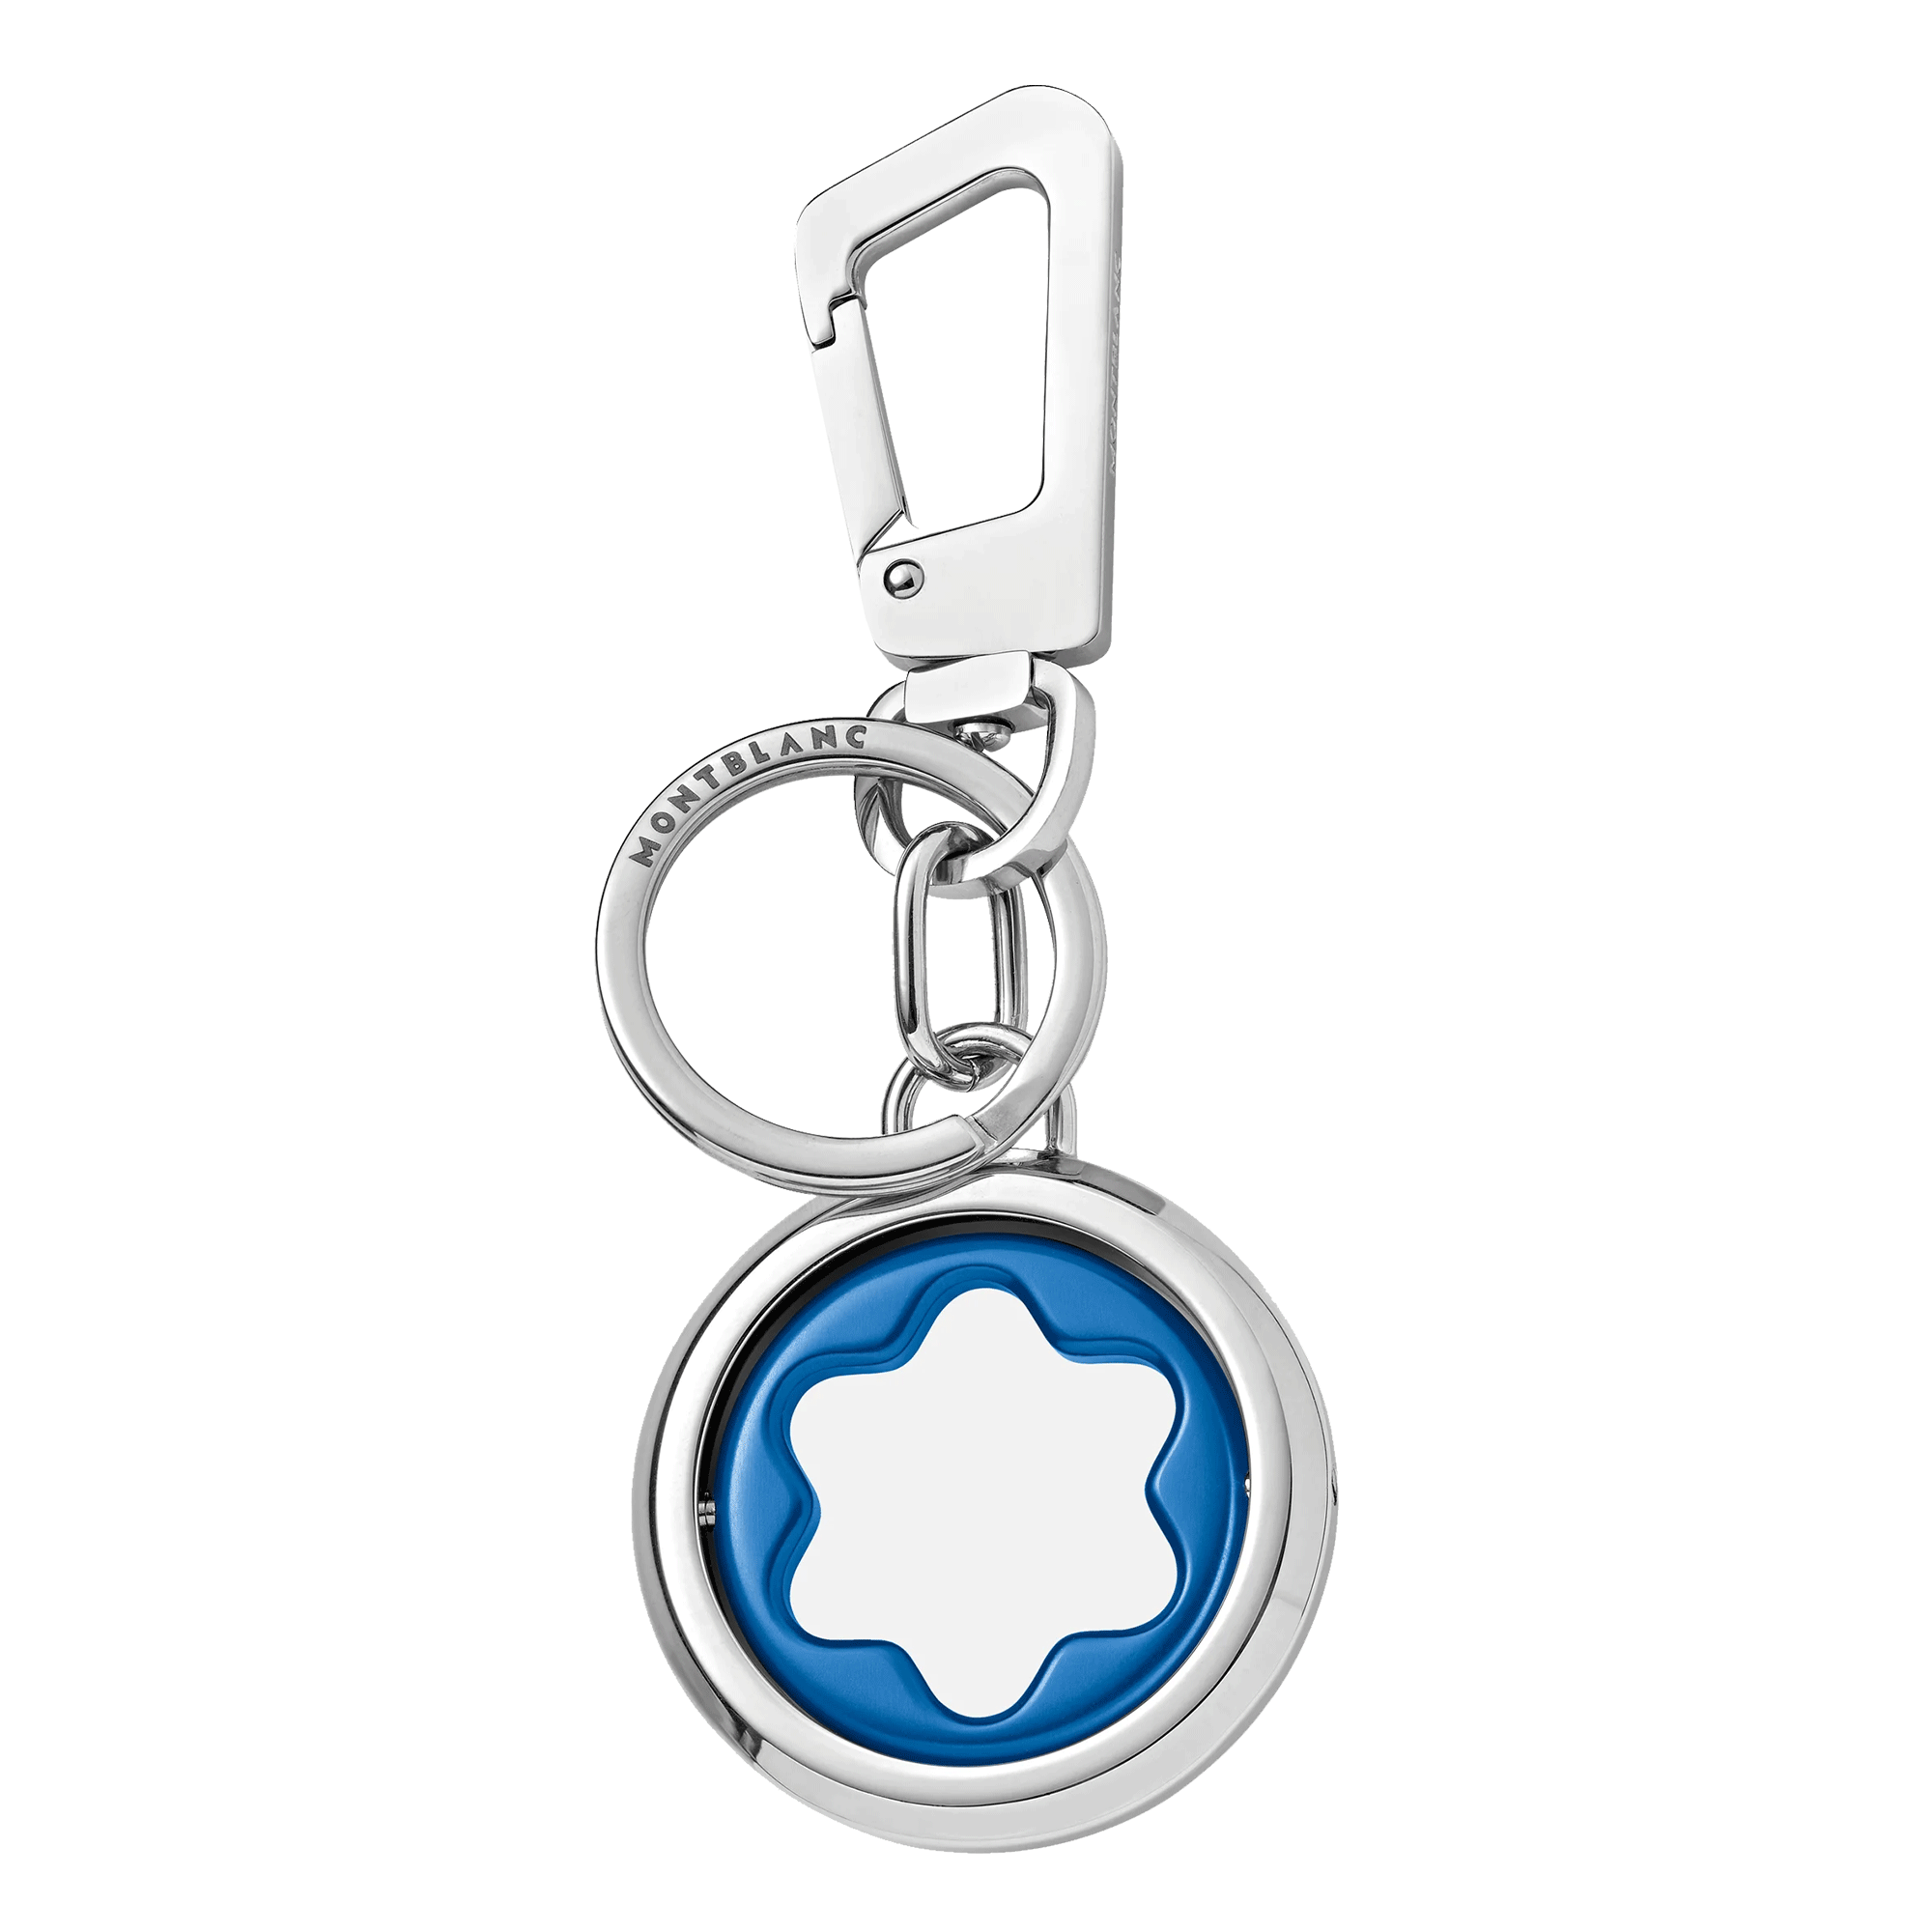 Meisterstuck Spinning Emblem Key Fob in Blue and Silver